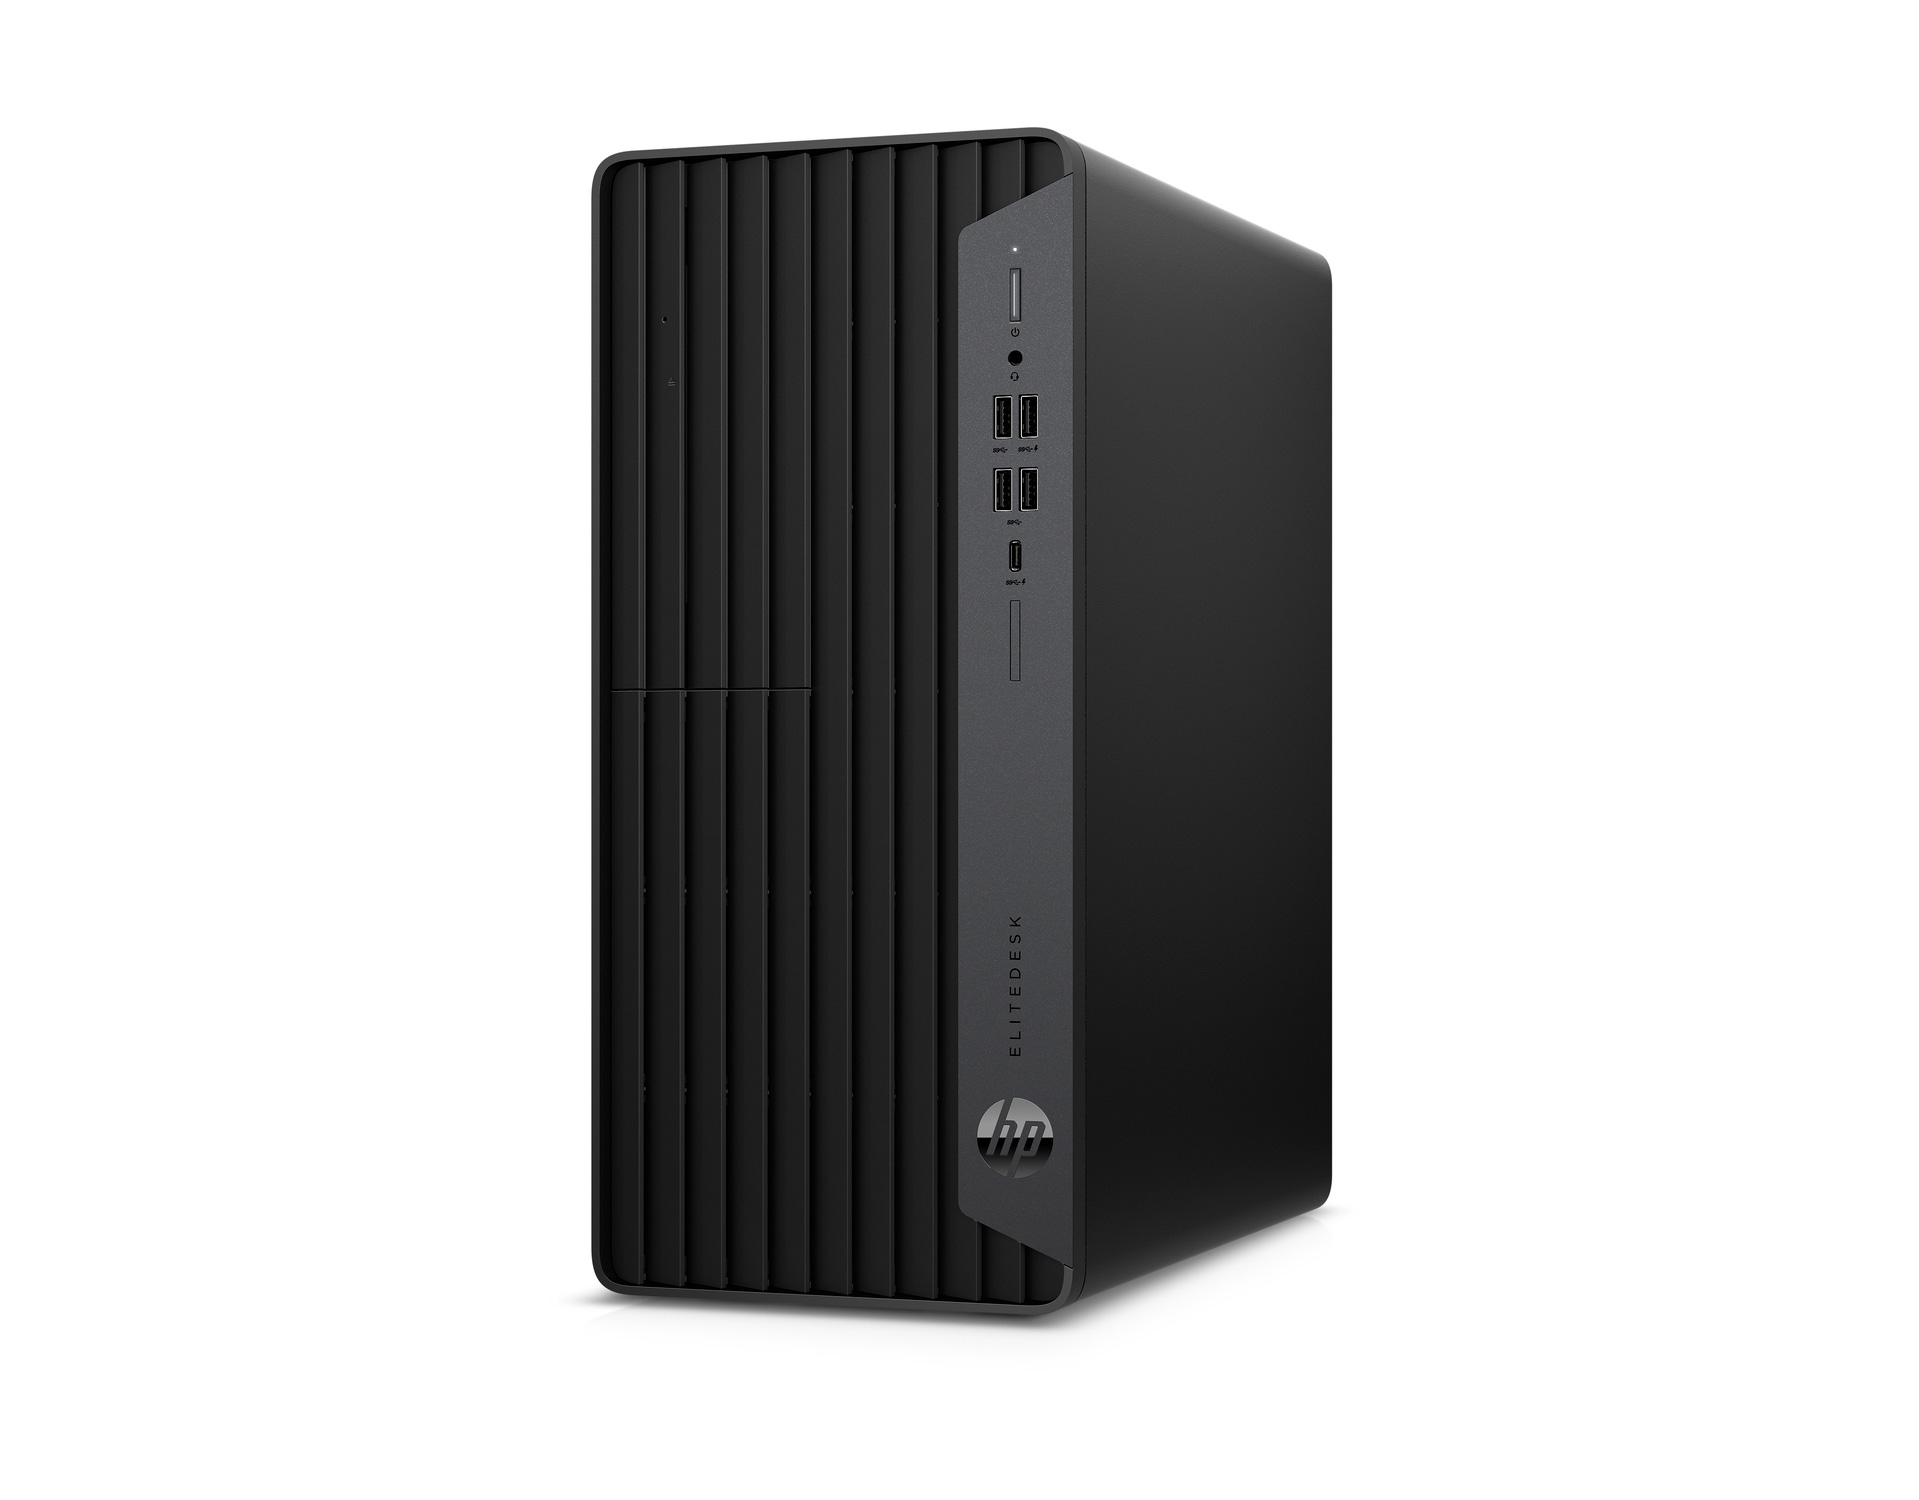 product-name:HP EliteDesk 800 G8 Tower PC Intel core I7-11700, Ram 8GB, HDD 1TB,supplier-name:Mania Computer Store